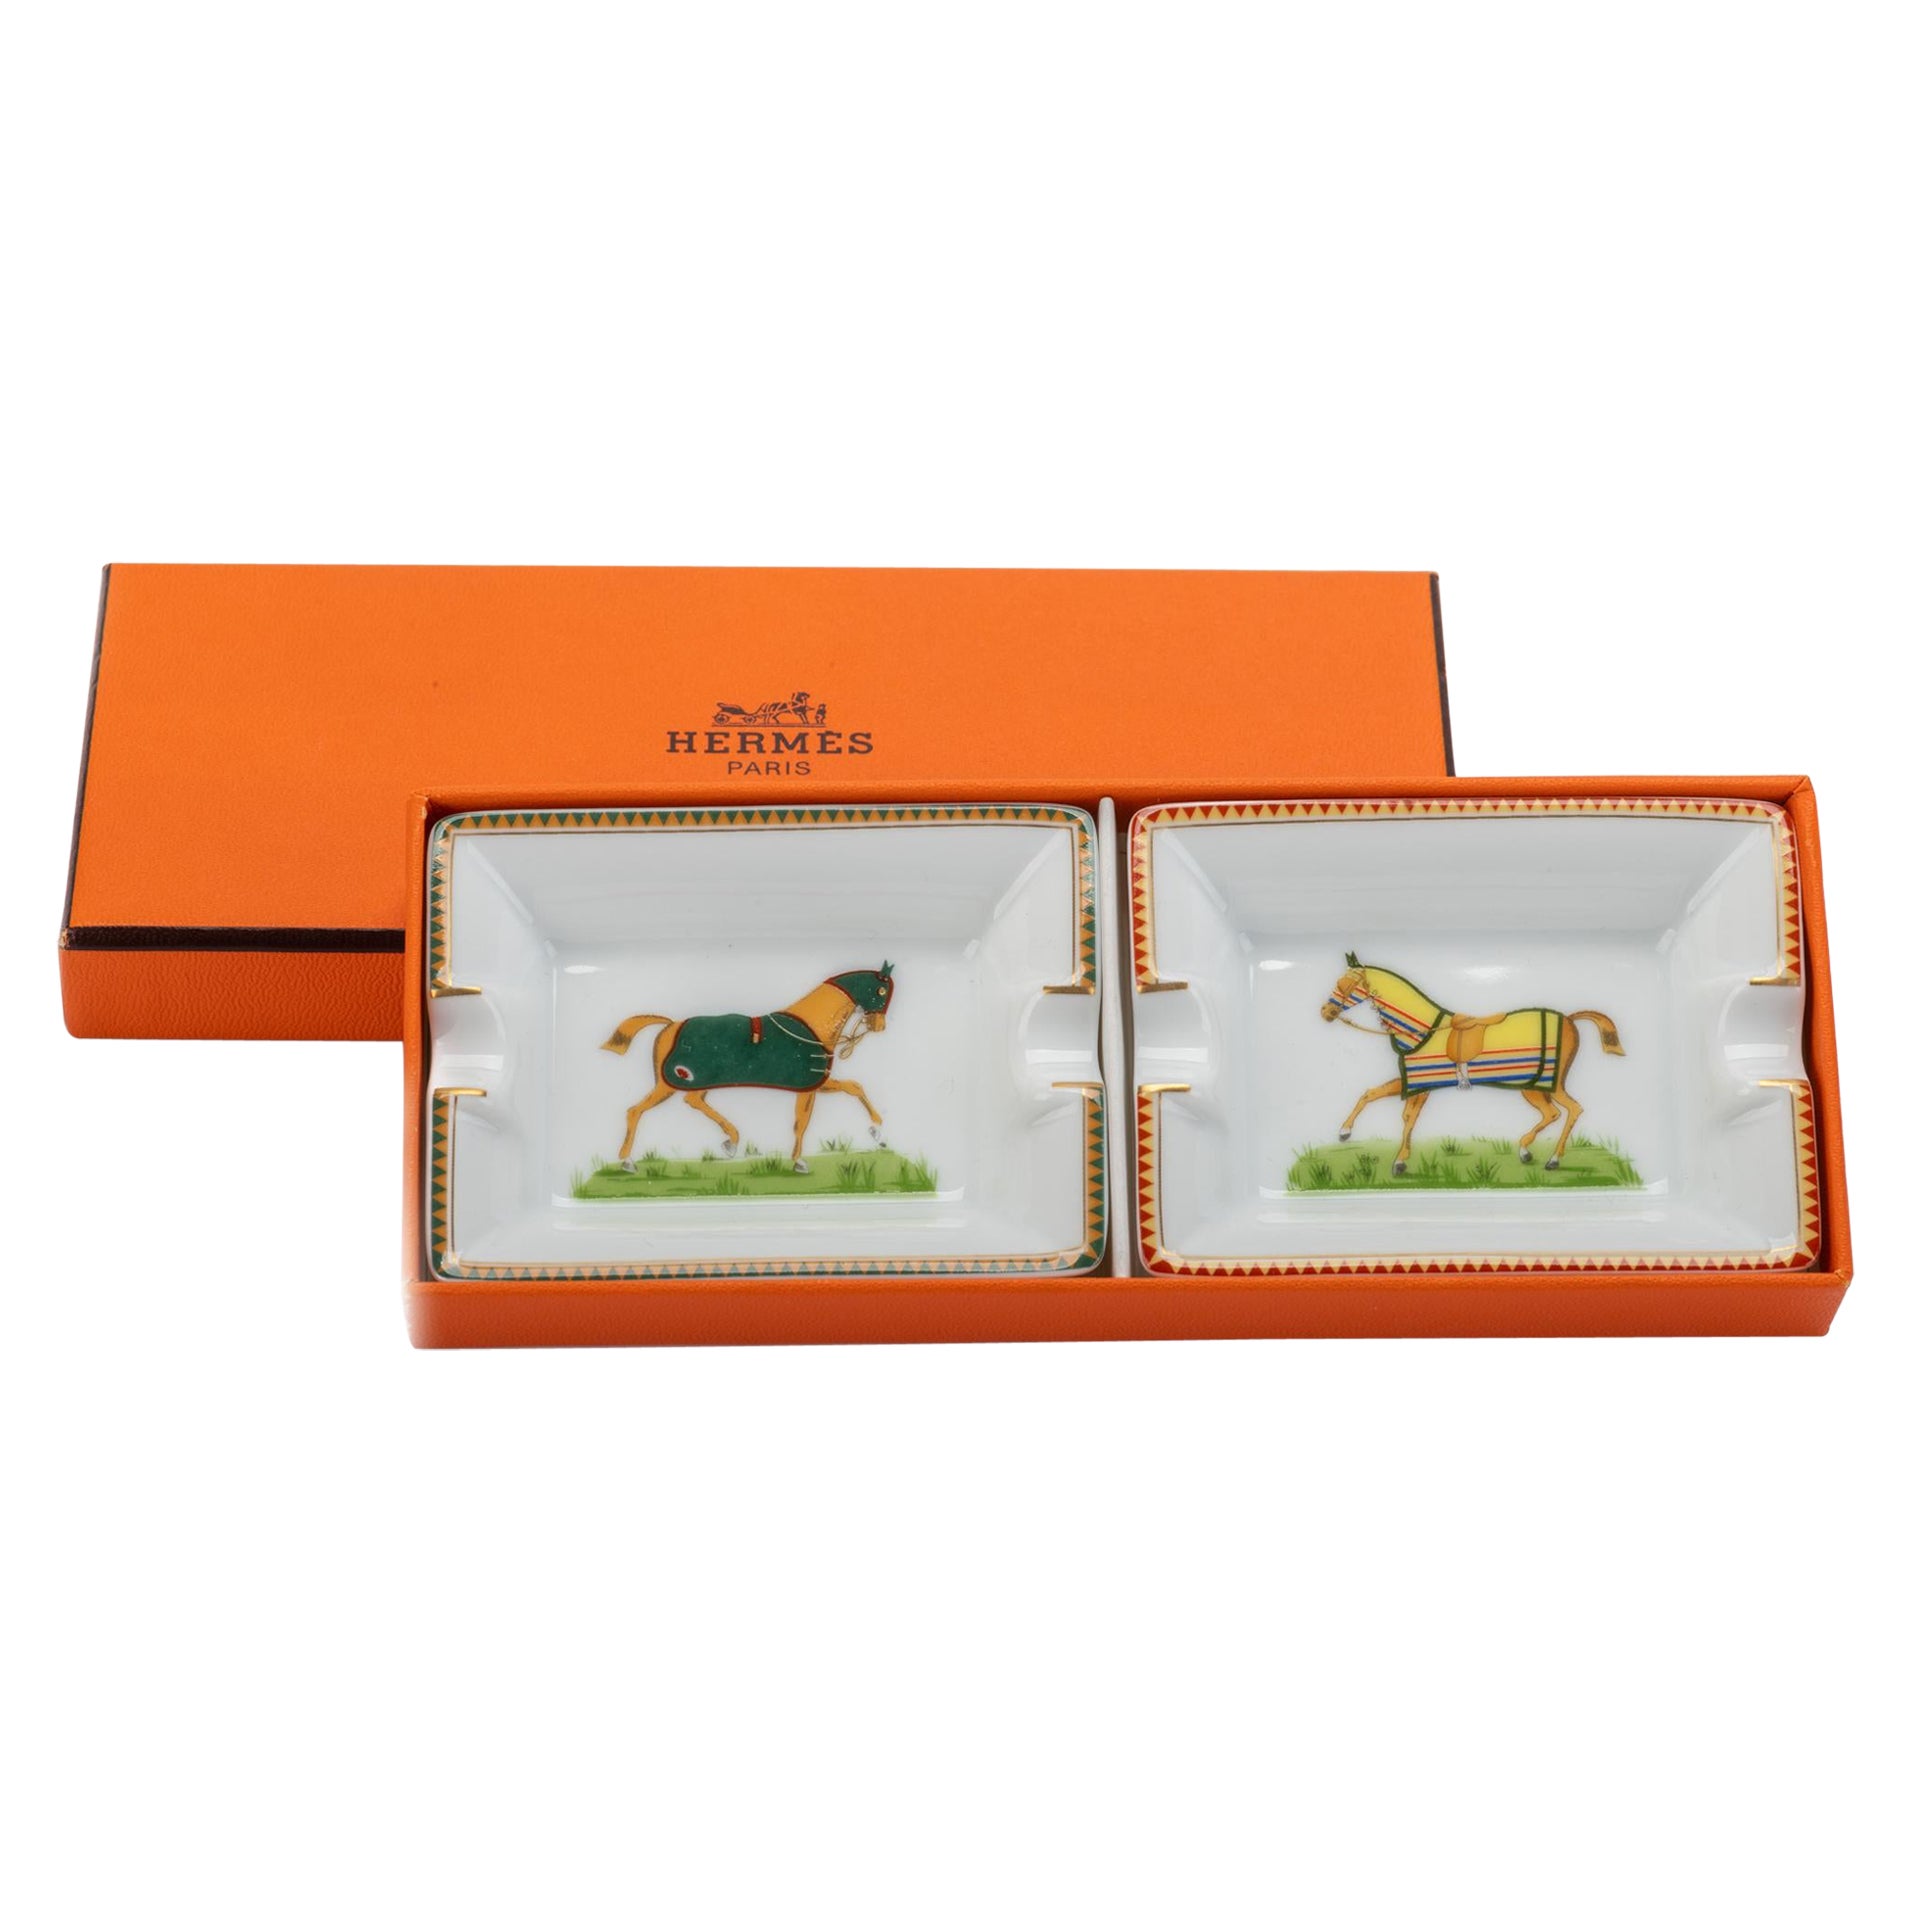 New Hermes Pair Horse Small Ashtrays in Box